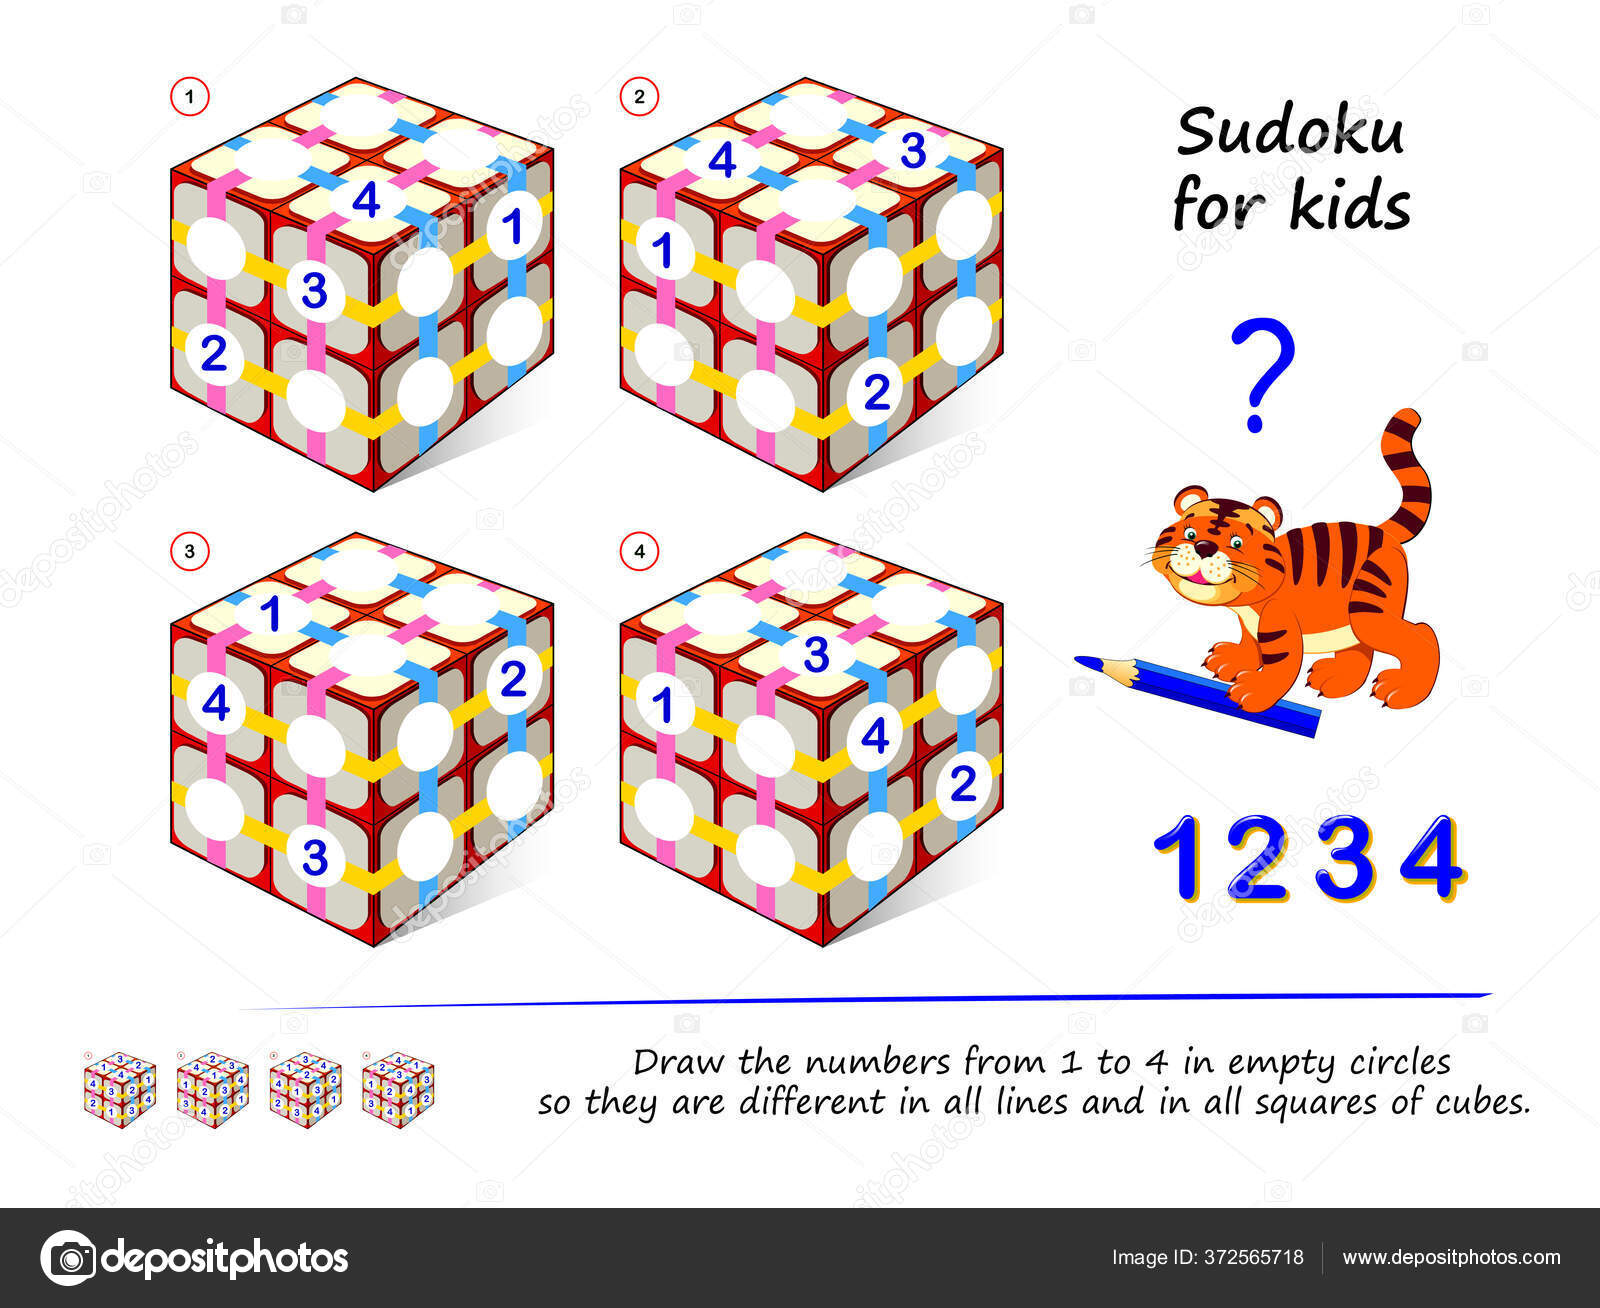 Logic Sudoku Game For Children And Adults. Big Size Puzzle With 3 Squares,  Difficult Level. Printable Page For Kids Brain Teaser Book. Developing  Counting Skills. IQ Training Test. Vector Image. Royalty Free